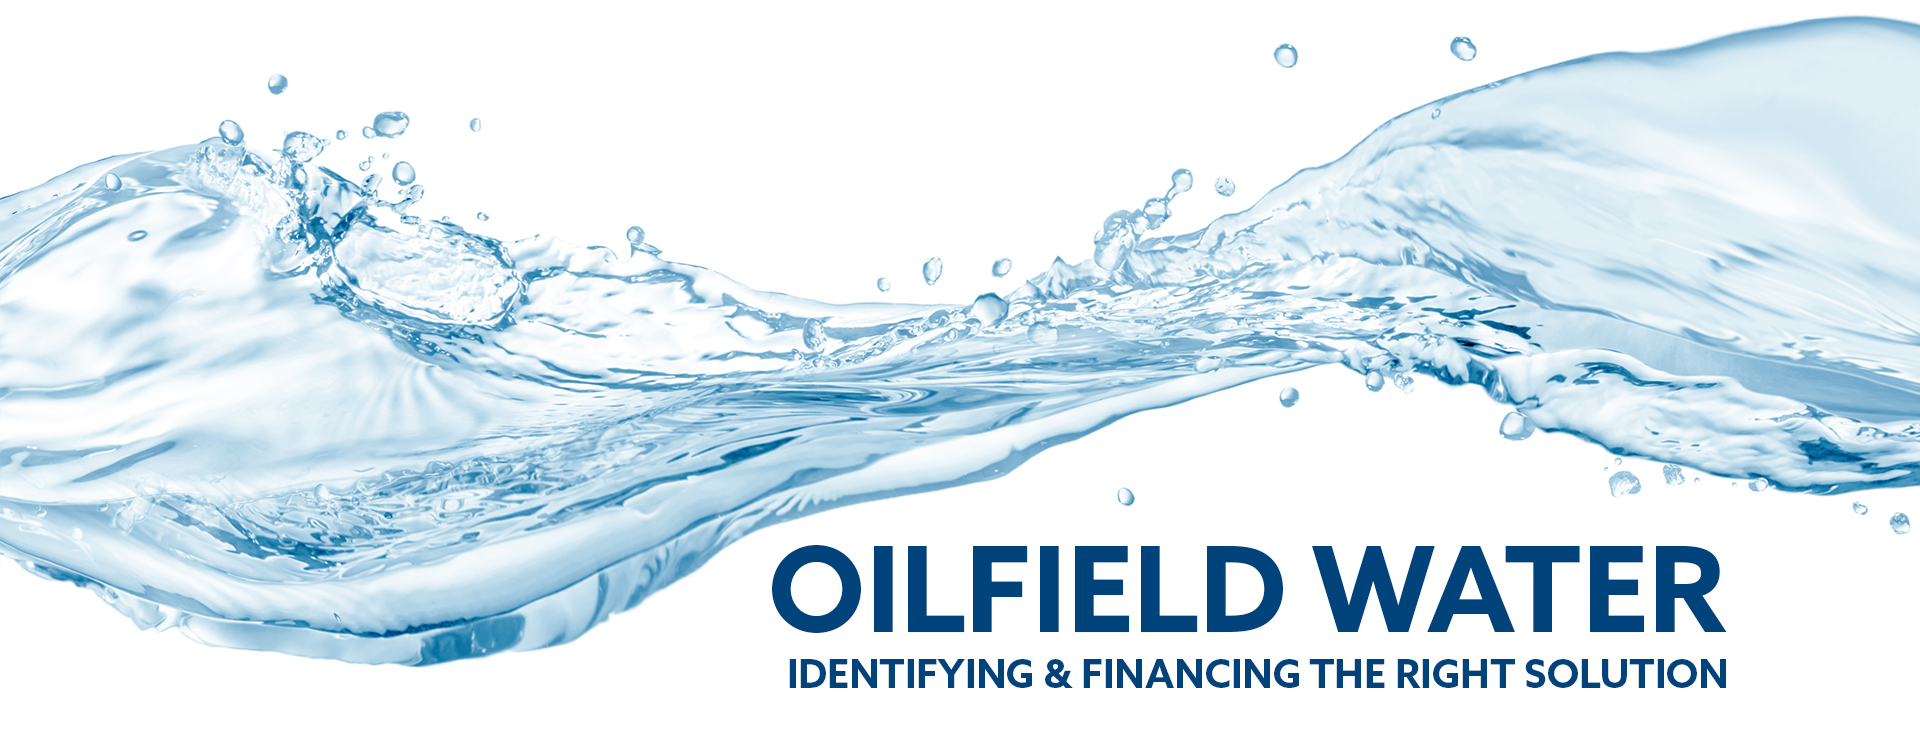 Oilfield Water: Identifying & Financing the Right Solution